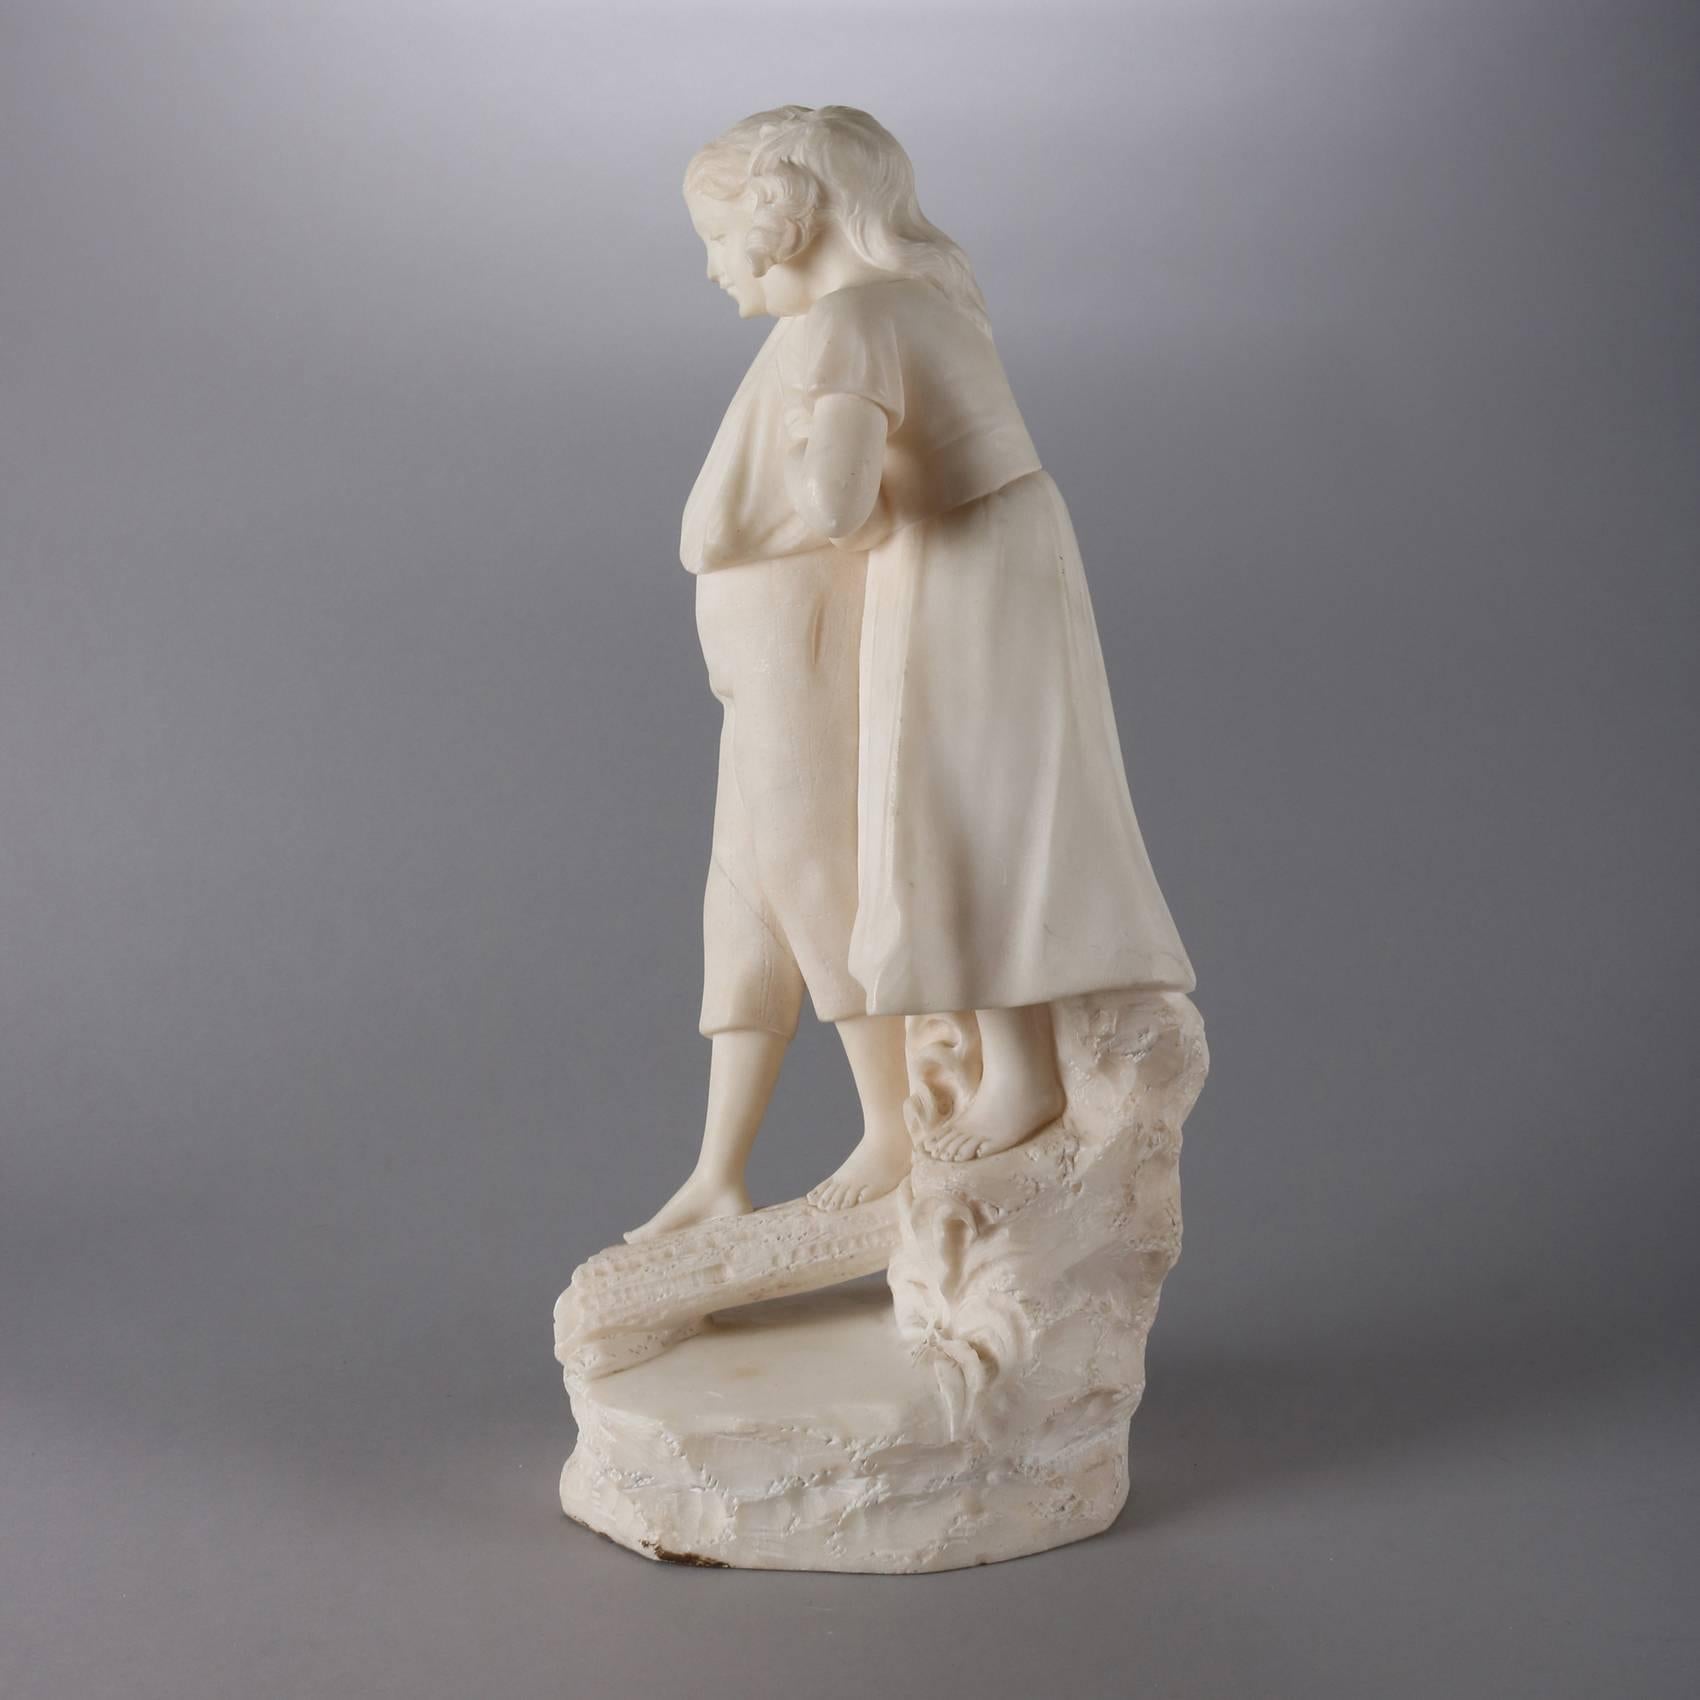 Antique English figural carved alabaster sculpture of barefoot peasant courting couple walking in the woods, 20th century

***DELIVERY NOTICE – Due to COVID-19 we are employing NO-CONTACT PRACTICES in the transfer of purchased items.  Additionally,